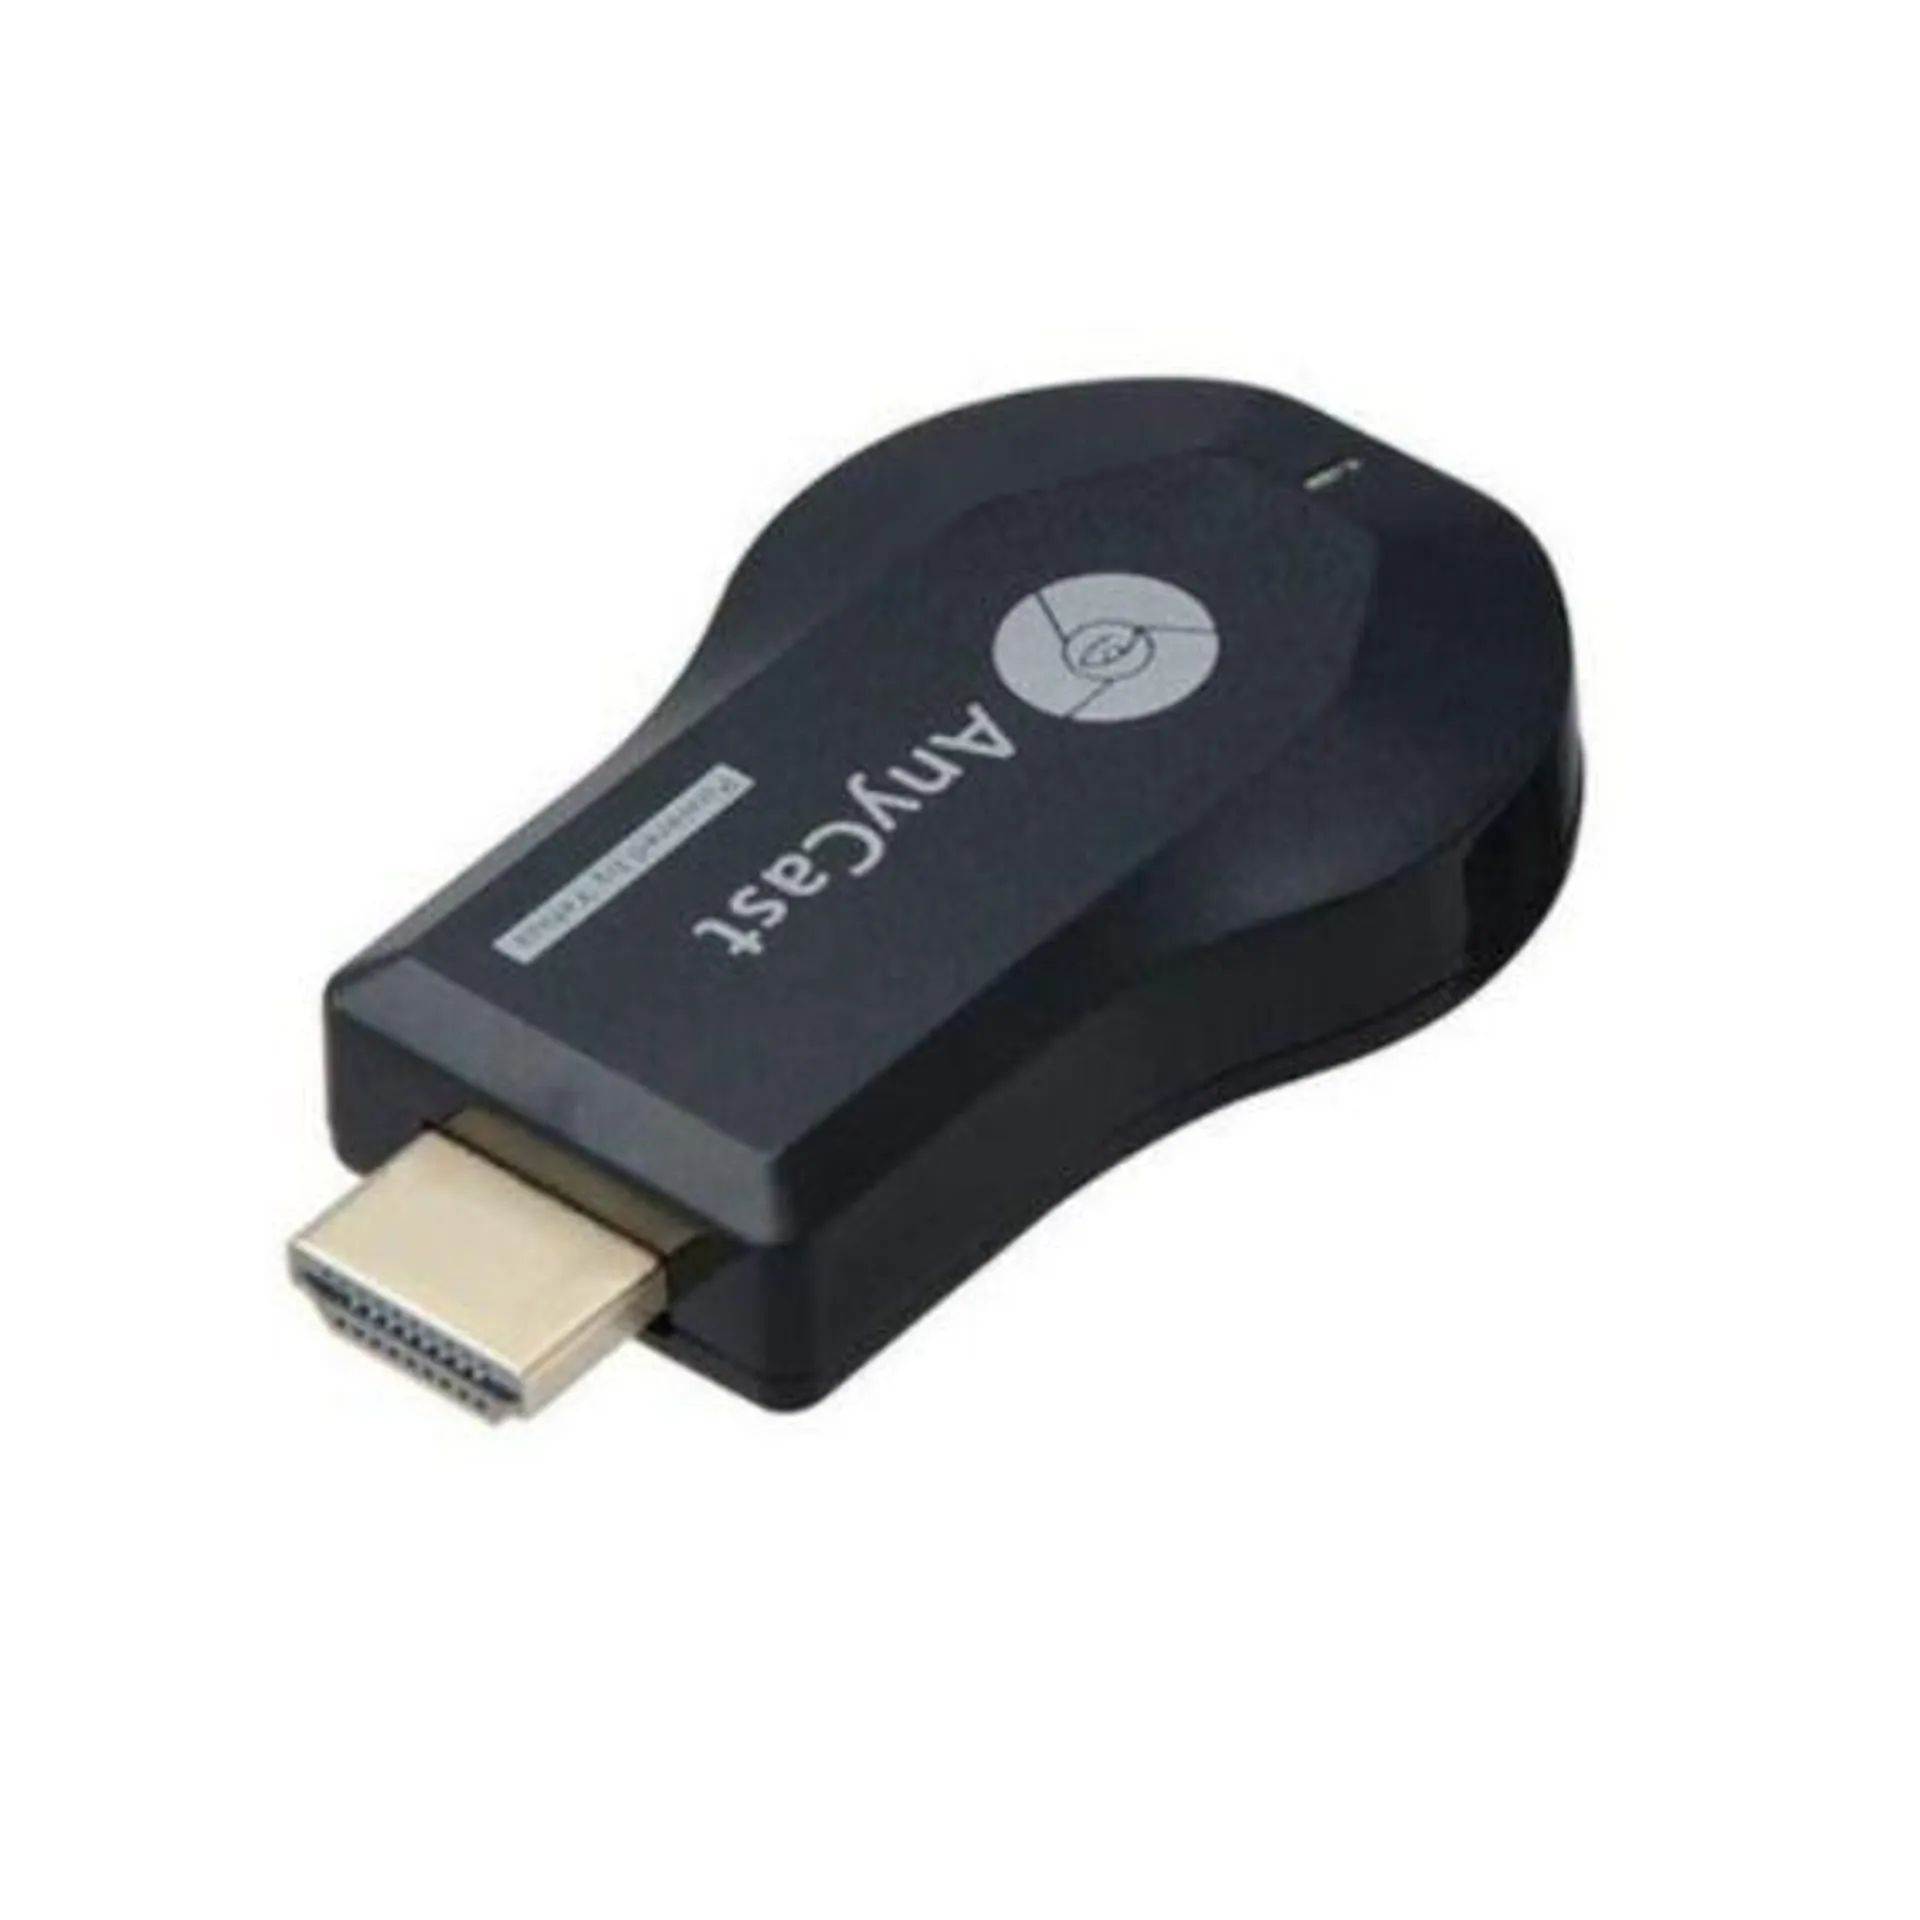 AnyCast M9+ HDMI Wi-Fi Display TV Dongle Receiver